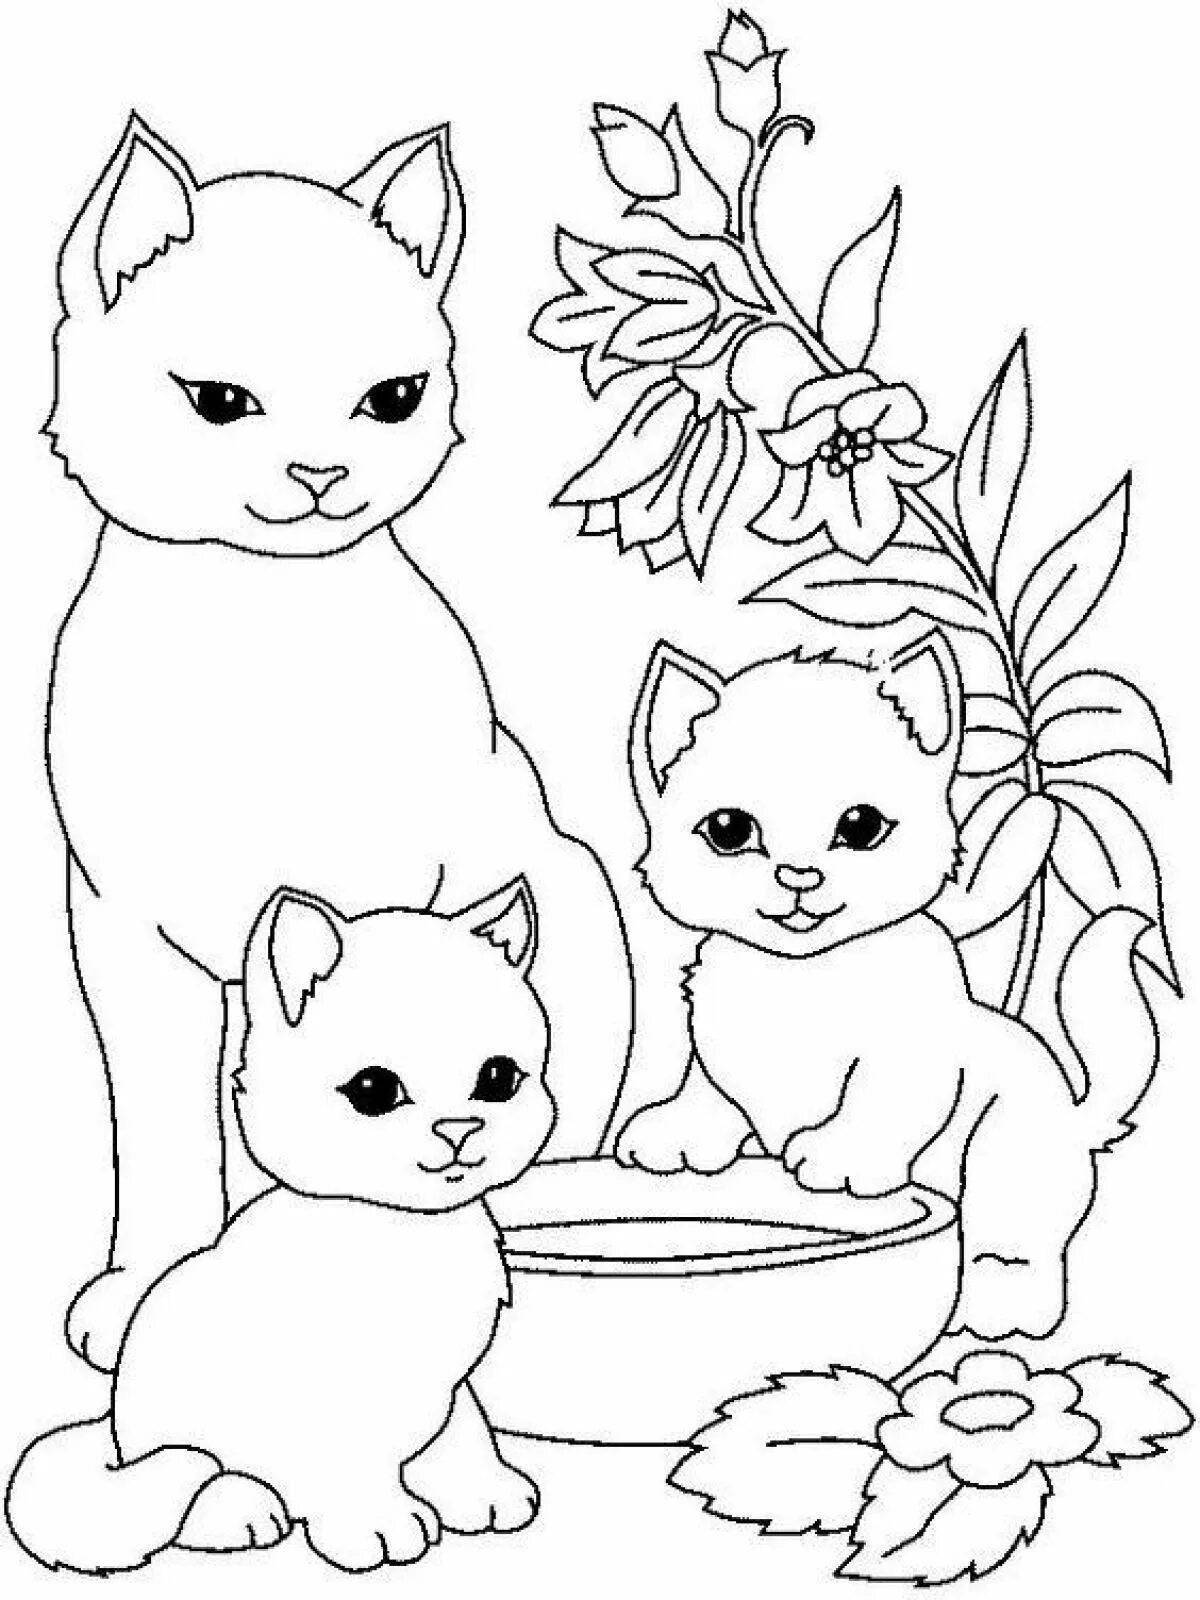 Coloring-inspiration coloring page